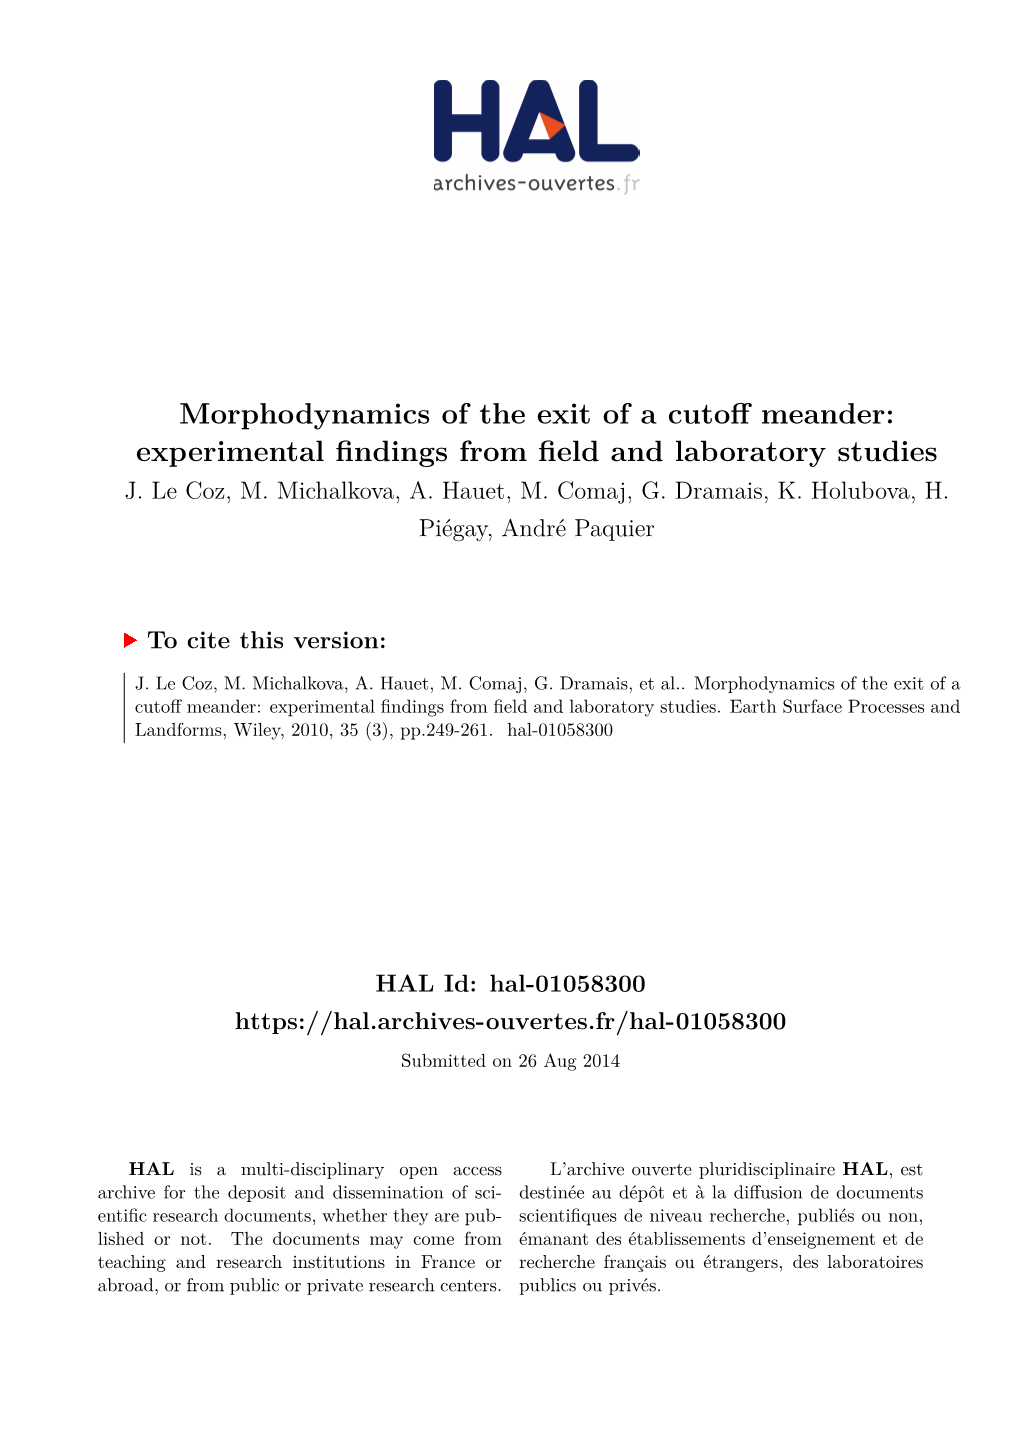 Morphodynamics of the Exit of a Cutoff Meander: Experimental Findings from Field and Laboratory Studies J